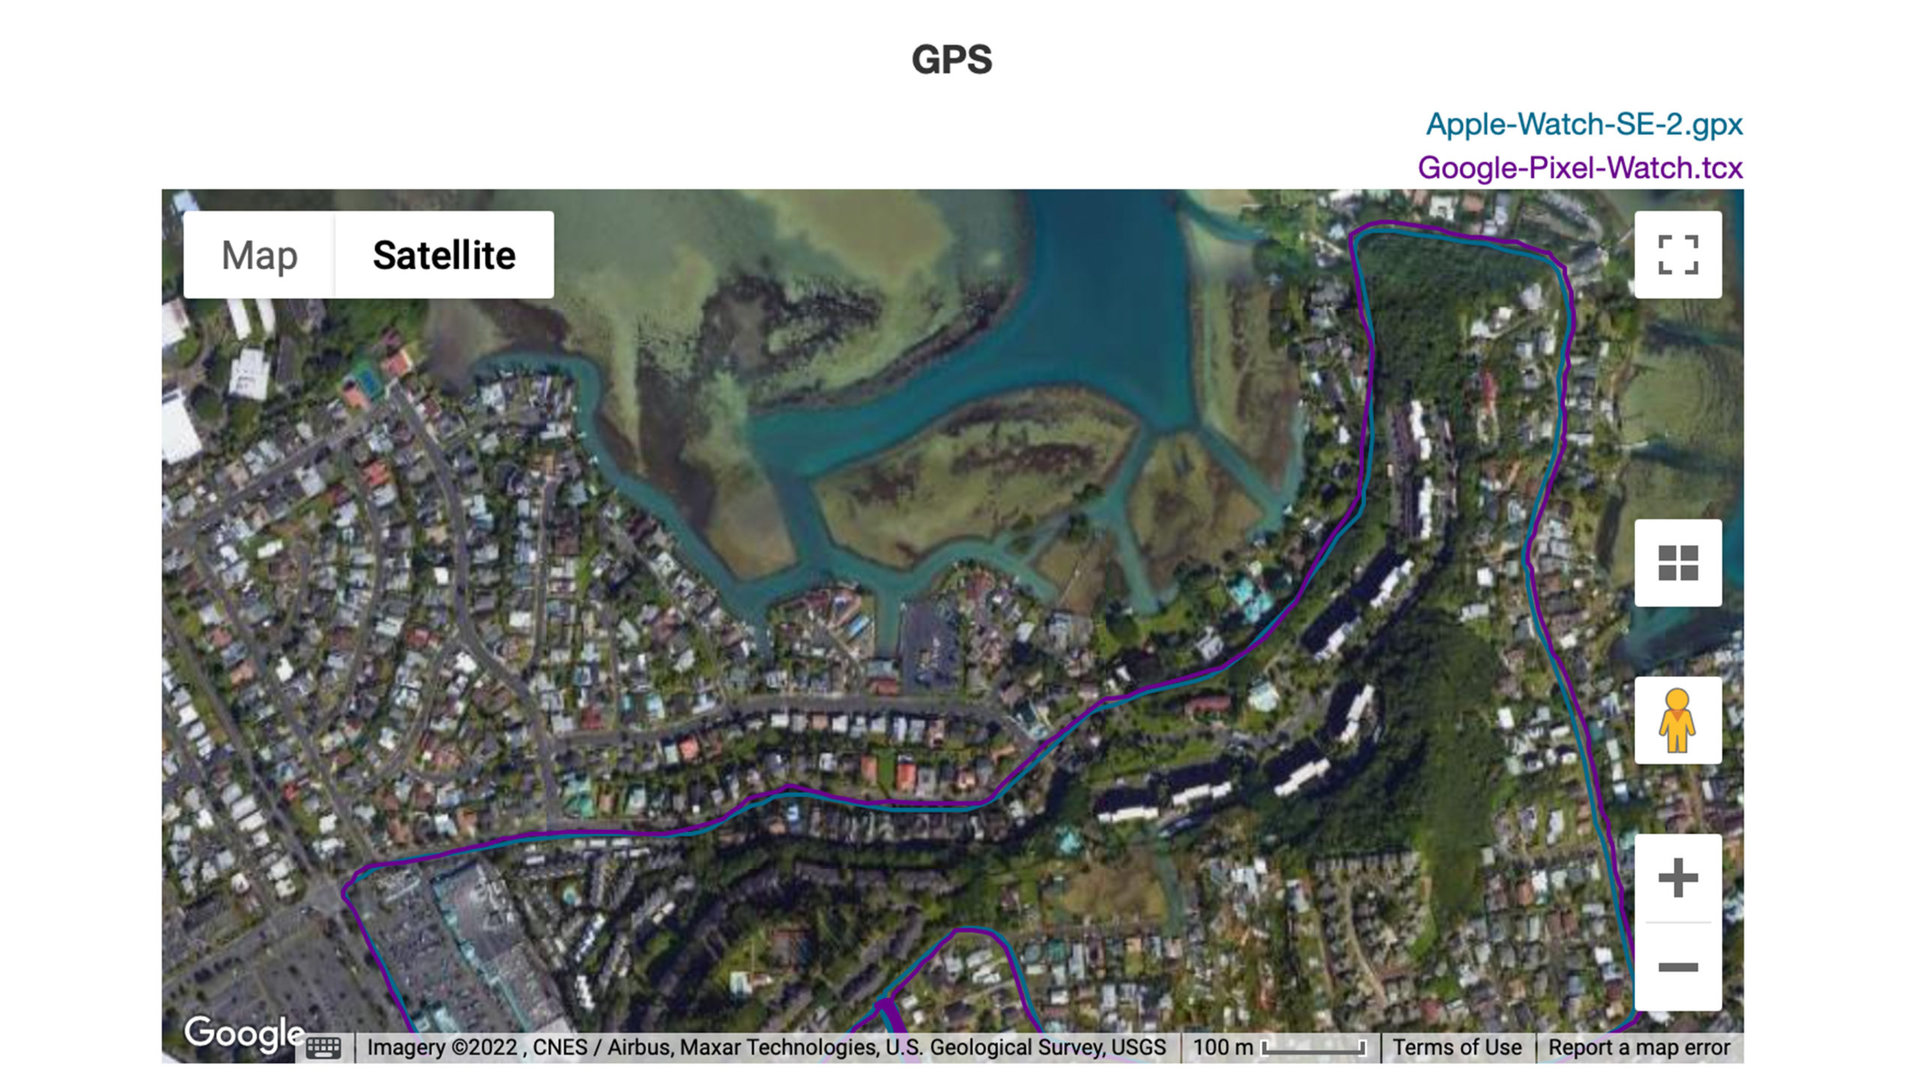 A GPS map shows a Google Pixel Watch running route compared to that of an Apple Watch SE 2.